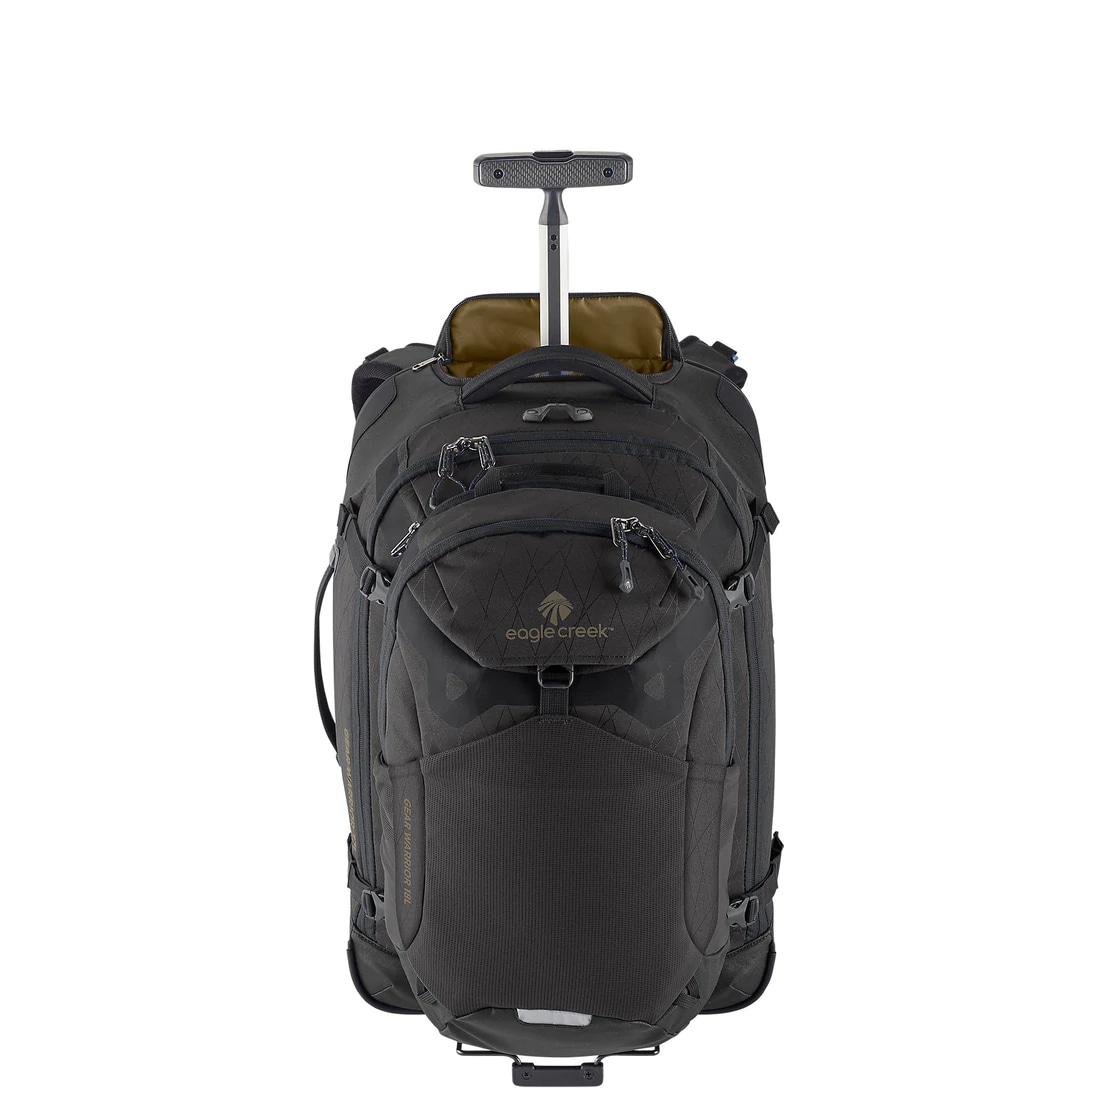 Gear Warrior Convertible Carry On